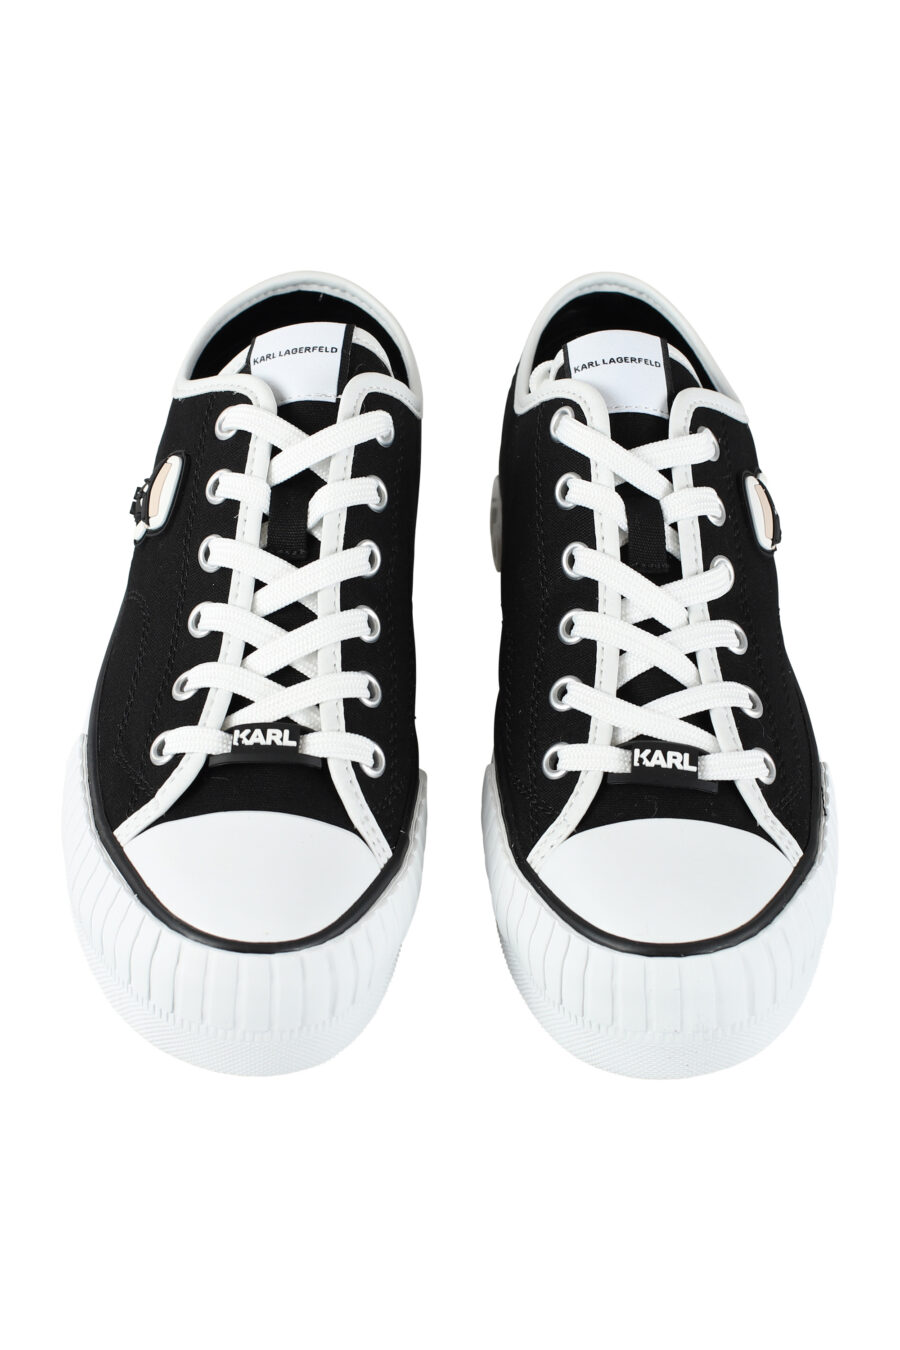 Black converse style trainers with rubber "karl" logo - IMG 9614